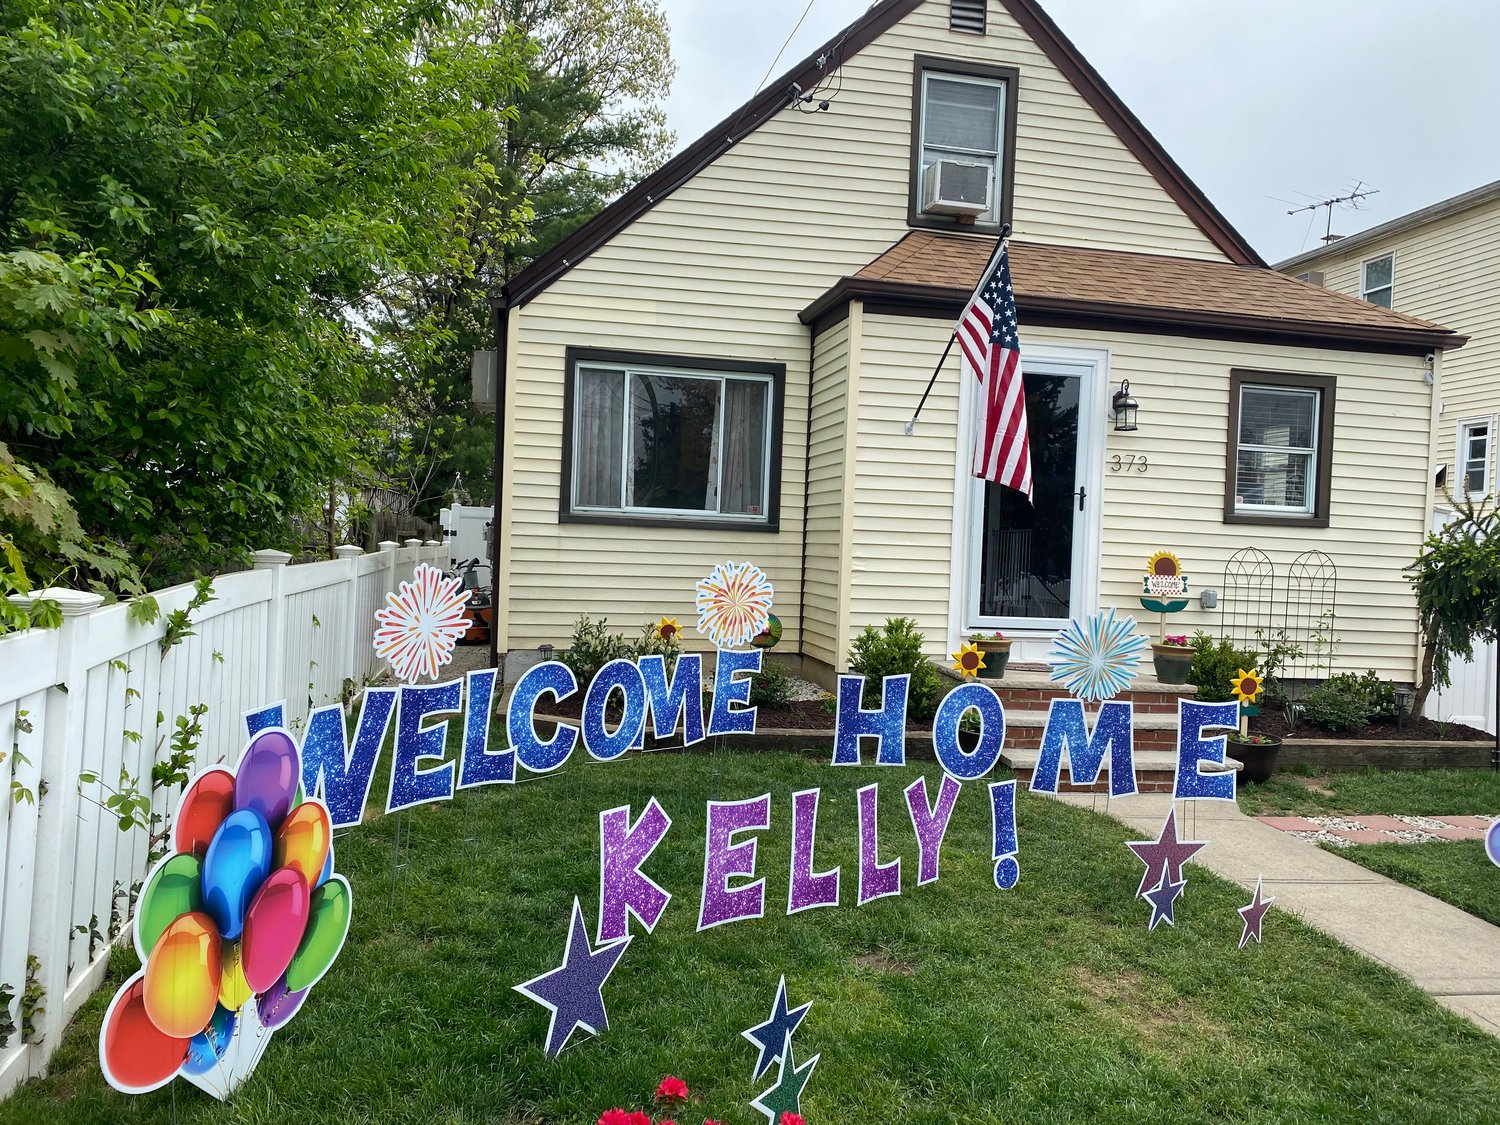 Kelly Arcillas returned to her Elmont home, at 373 Randall Ave., on May 12 for the first time in over two years.